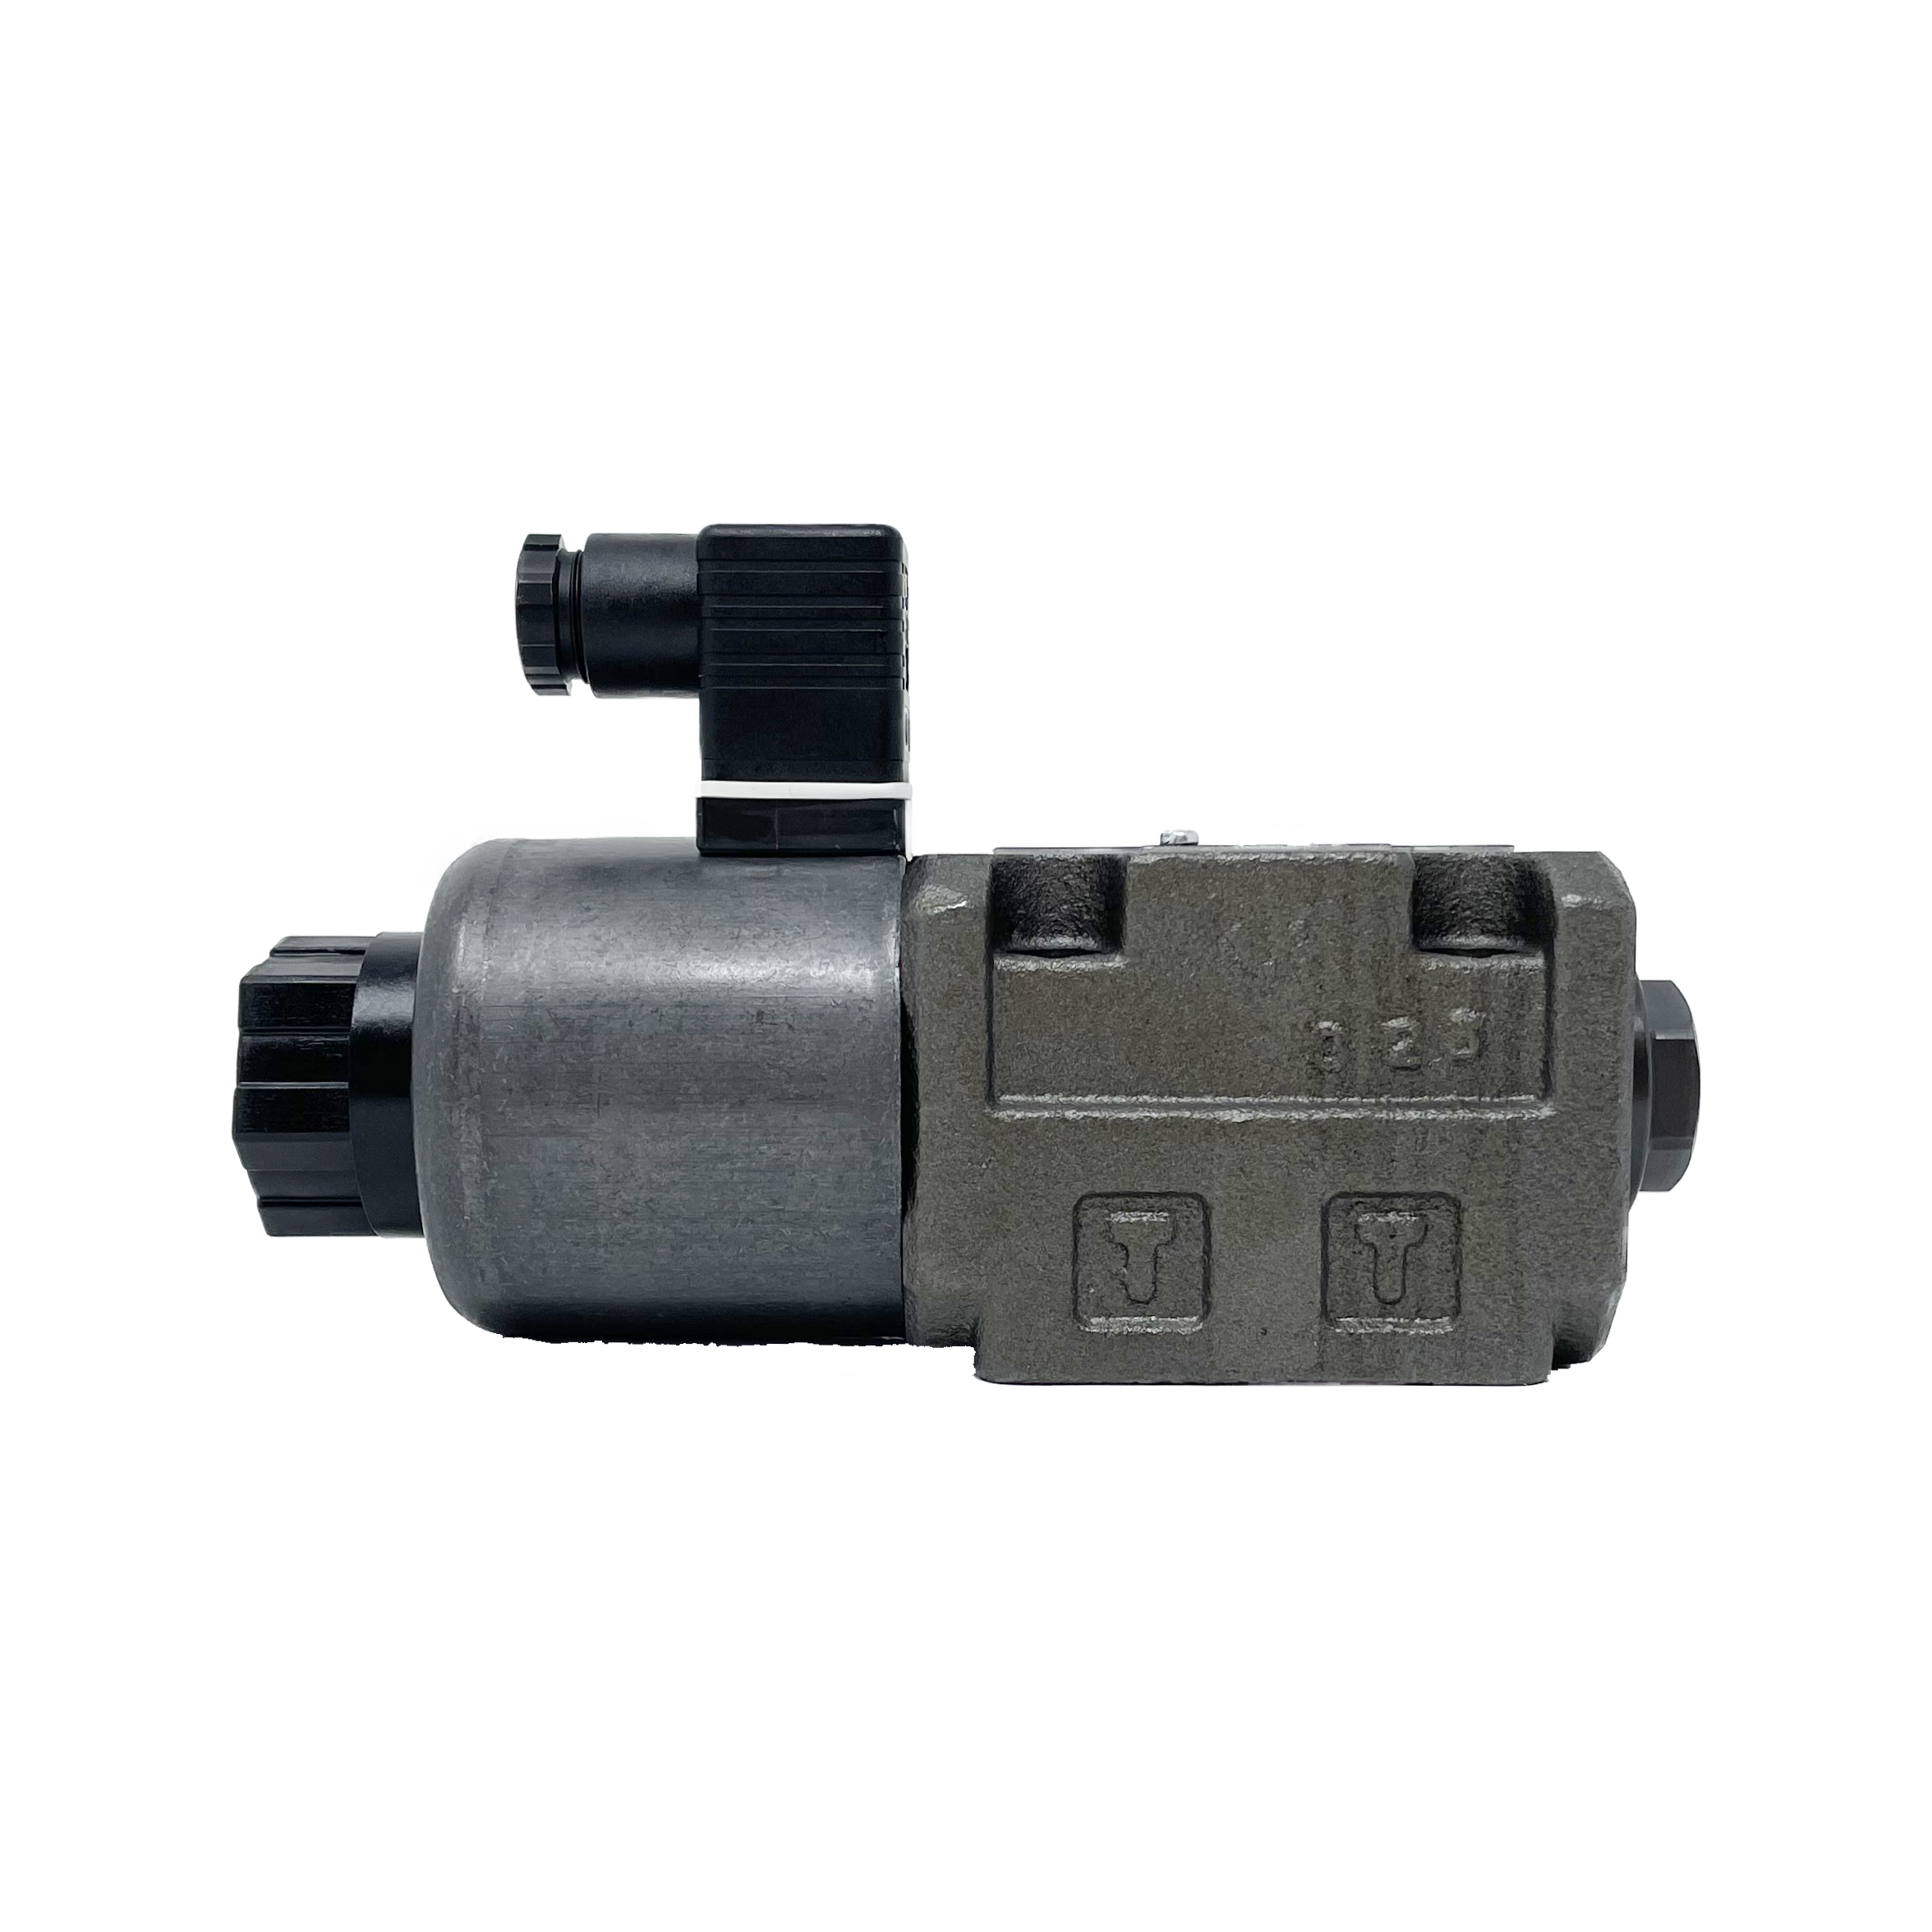 SA-G03-A4-C115-E21 : Nachi Solenoid Valve, 3P4W, D05 (NG10), 34.3GPM, 5075psi, All Ports Open Neutral, 110 VAC, DIN